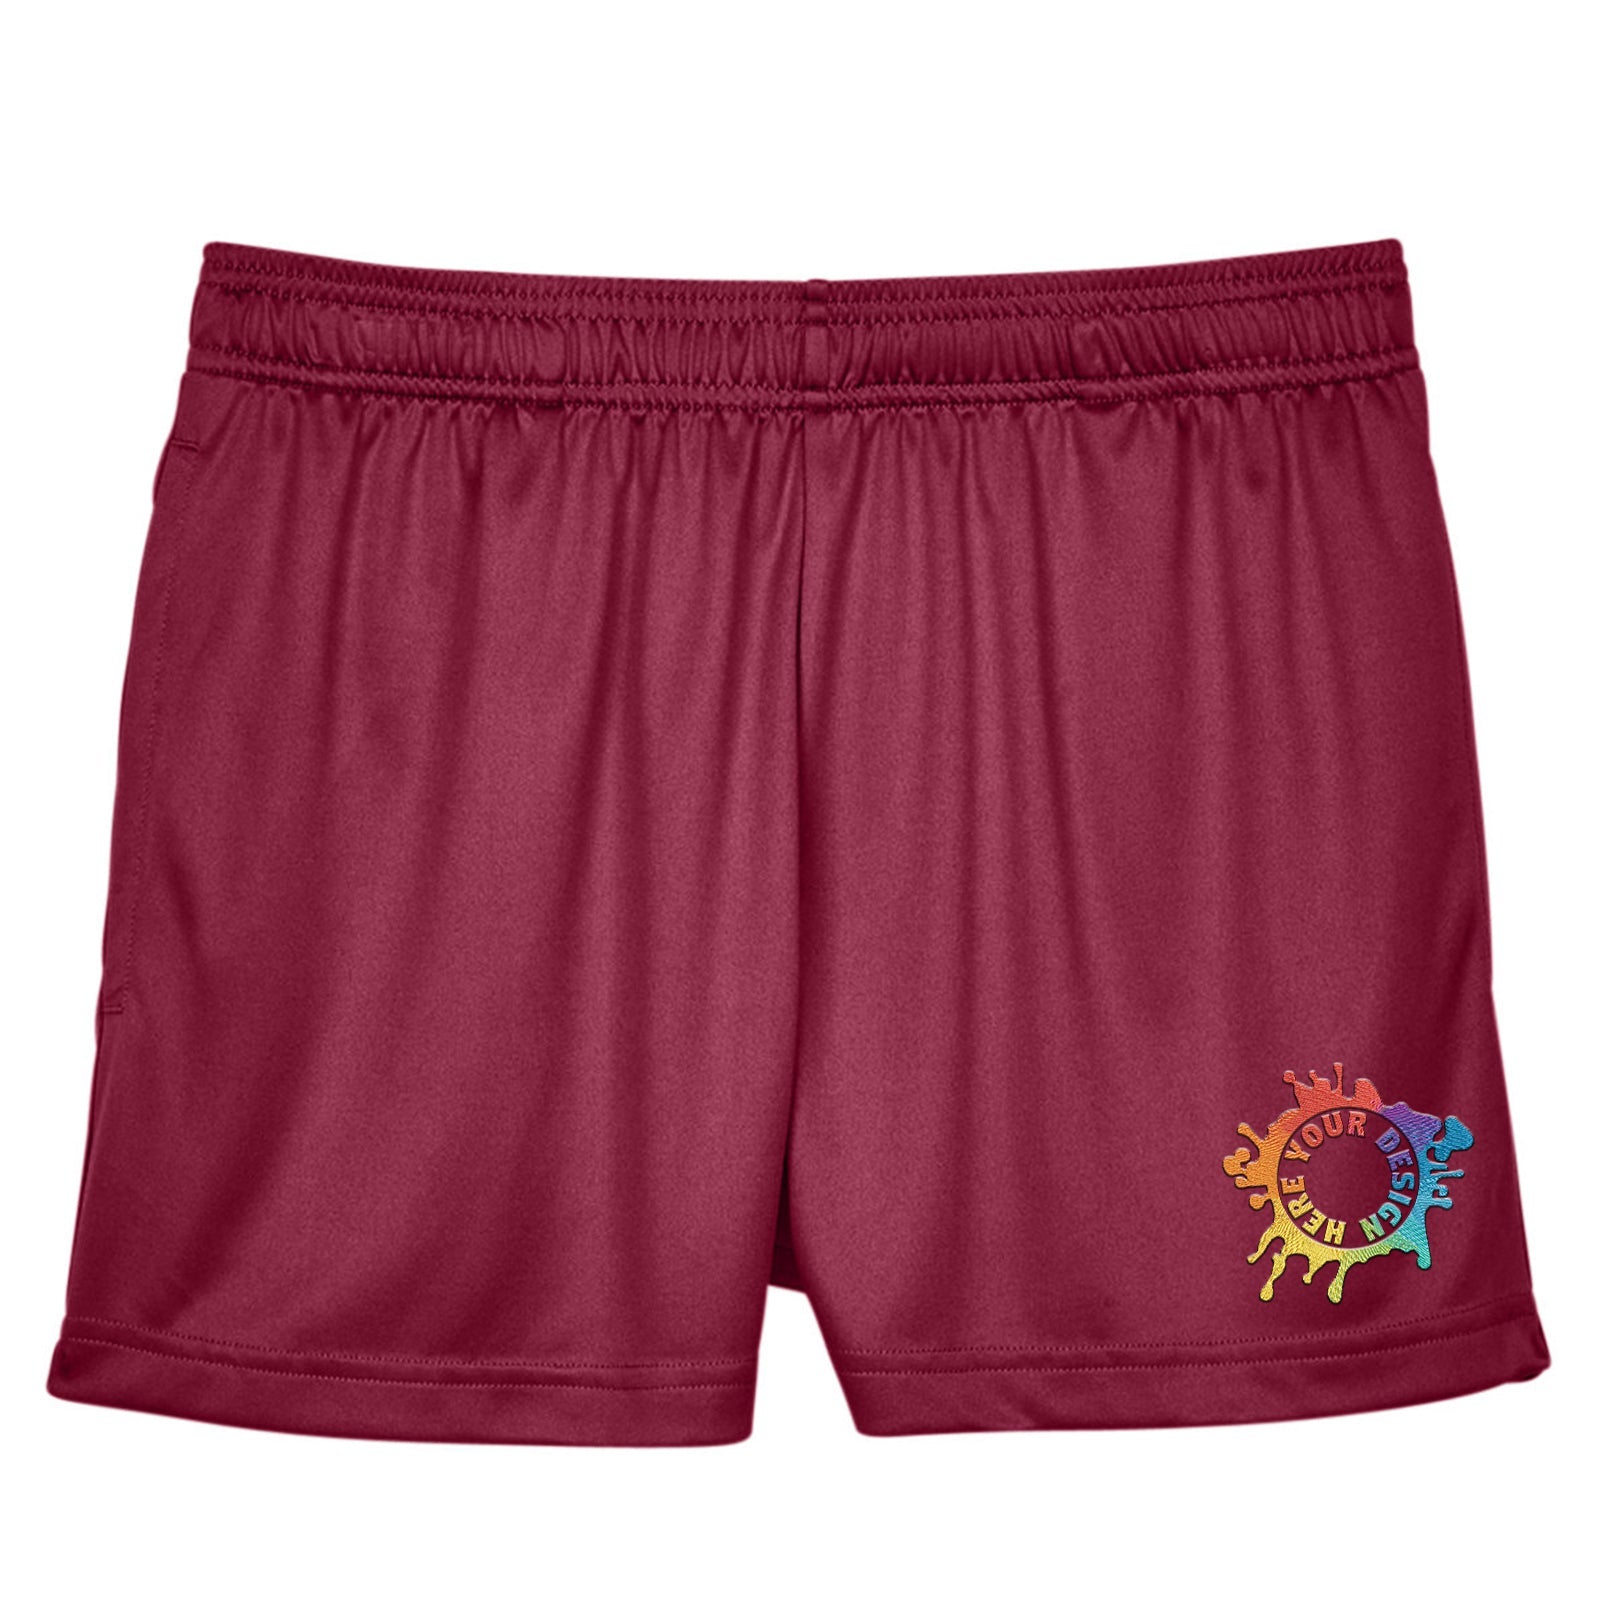 Team 365 Ladies' Zone Performance Shorts Embroidery